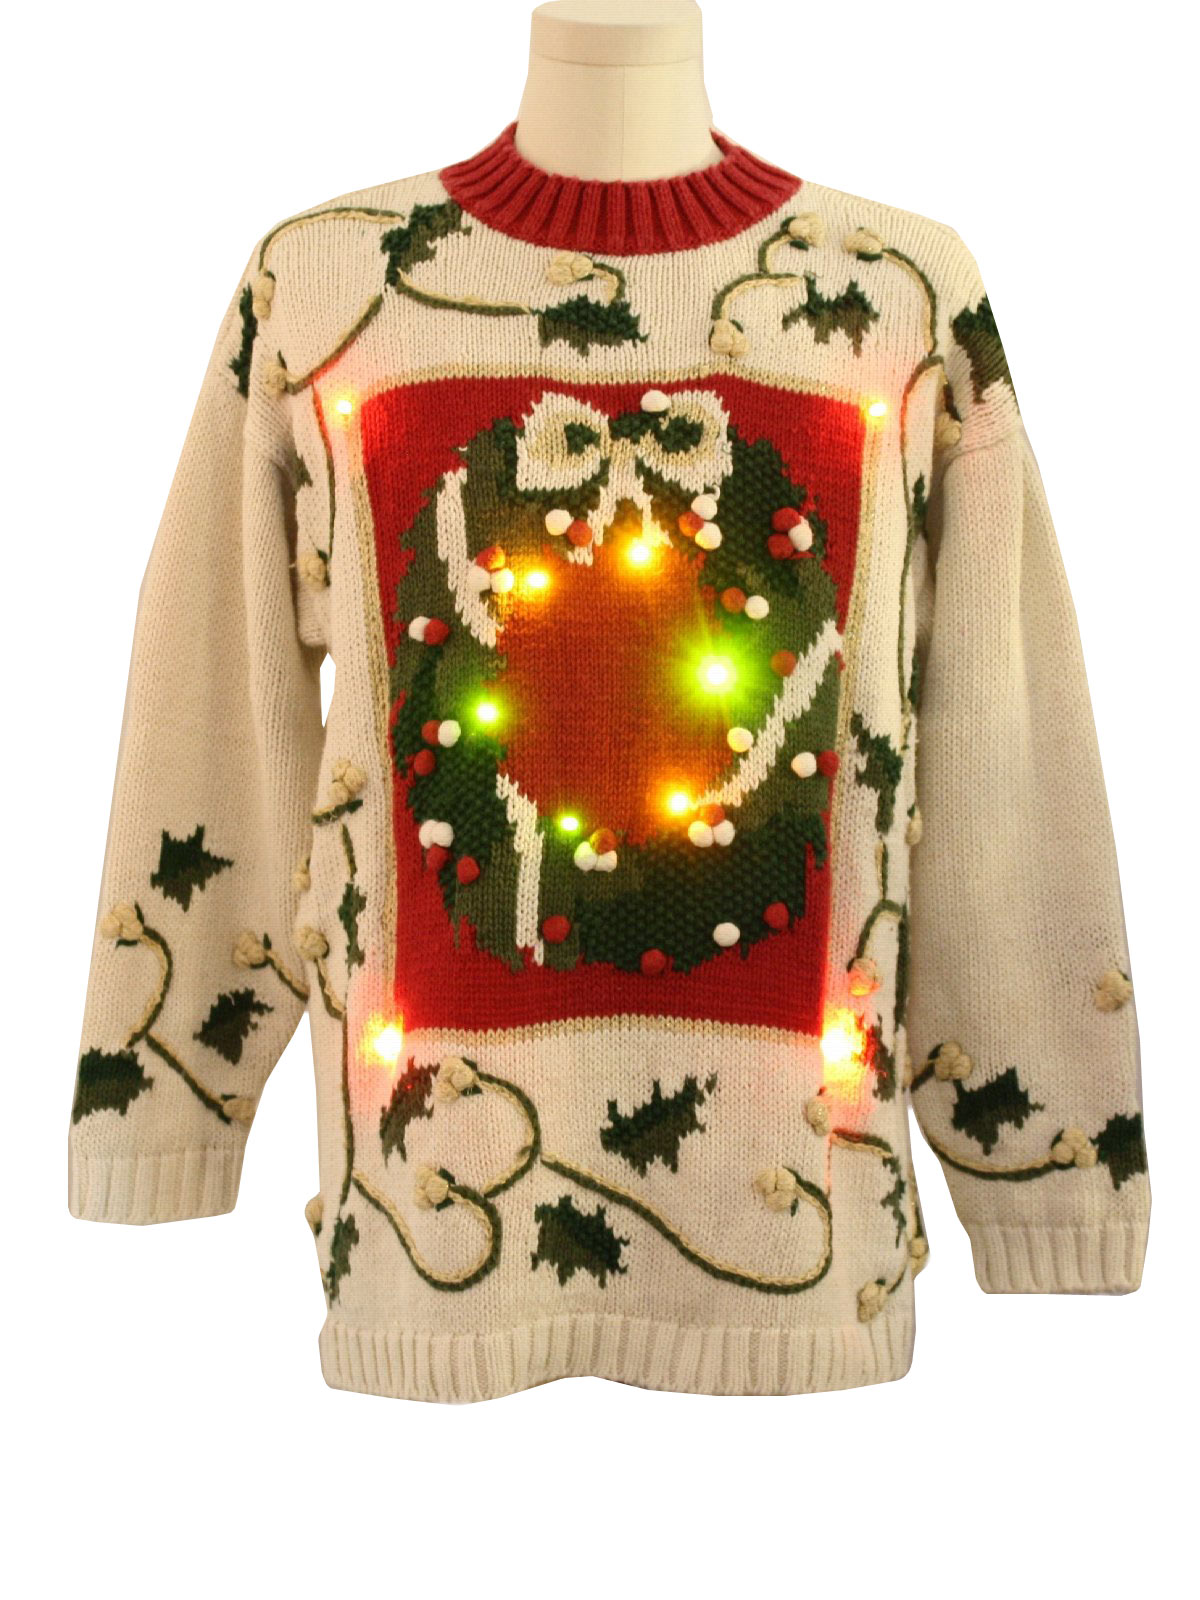 Lightup Ugly Christmas Sweater: -Cullinane- Unisex cream and red ...